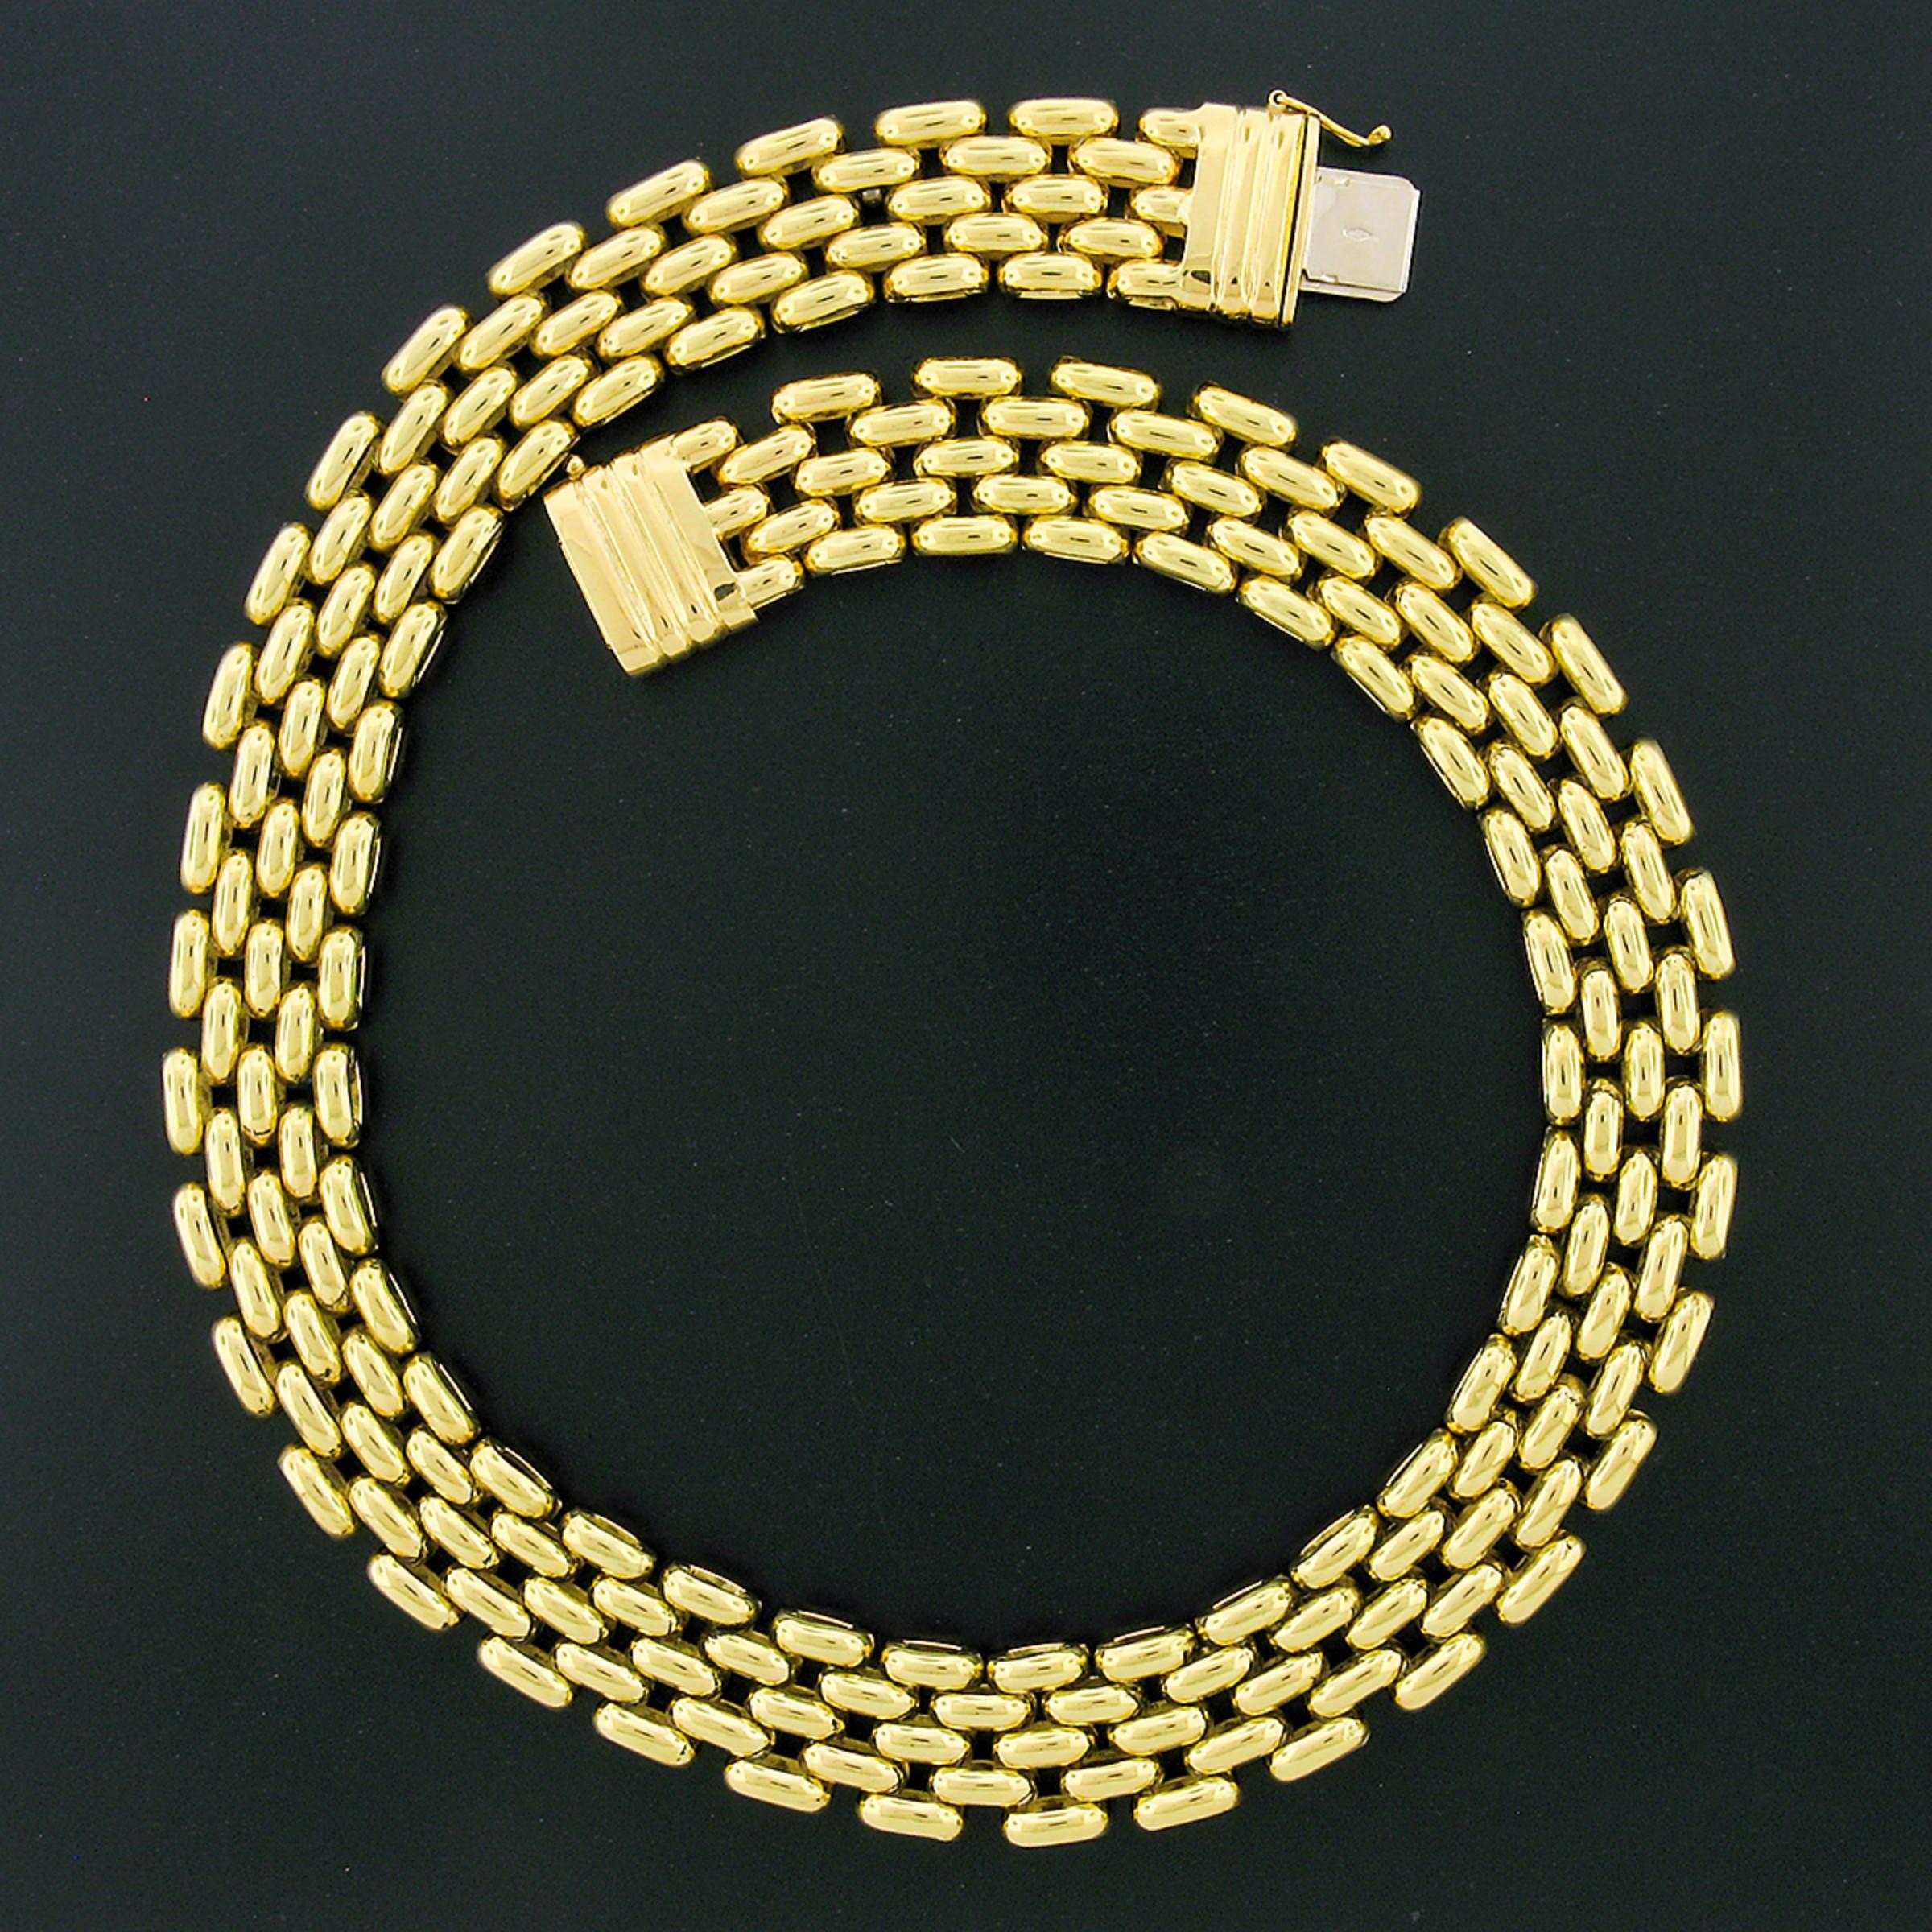 This incredible necklace was crafted in Italy from solid 18k yellow gold and features a wide panther link design with a nice high-polished finish throughout. The chain measures 17.75 inches in wearable length and elegantly lays around the neck with